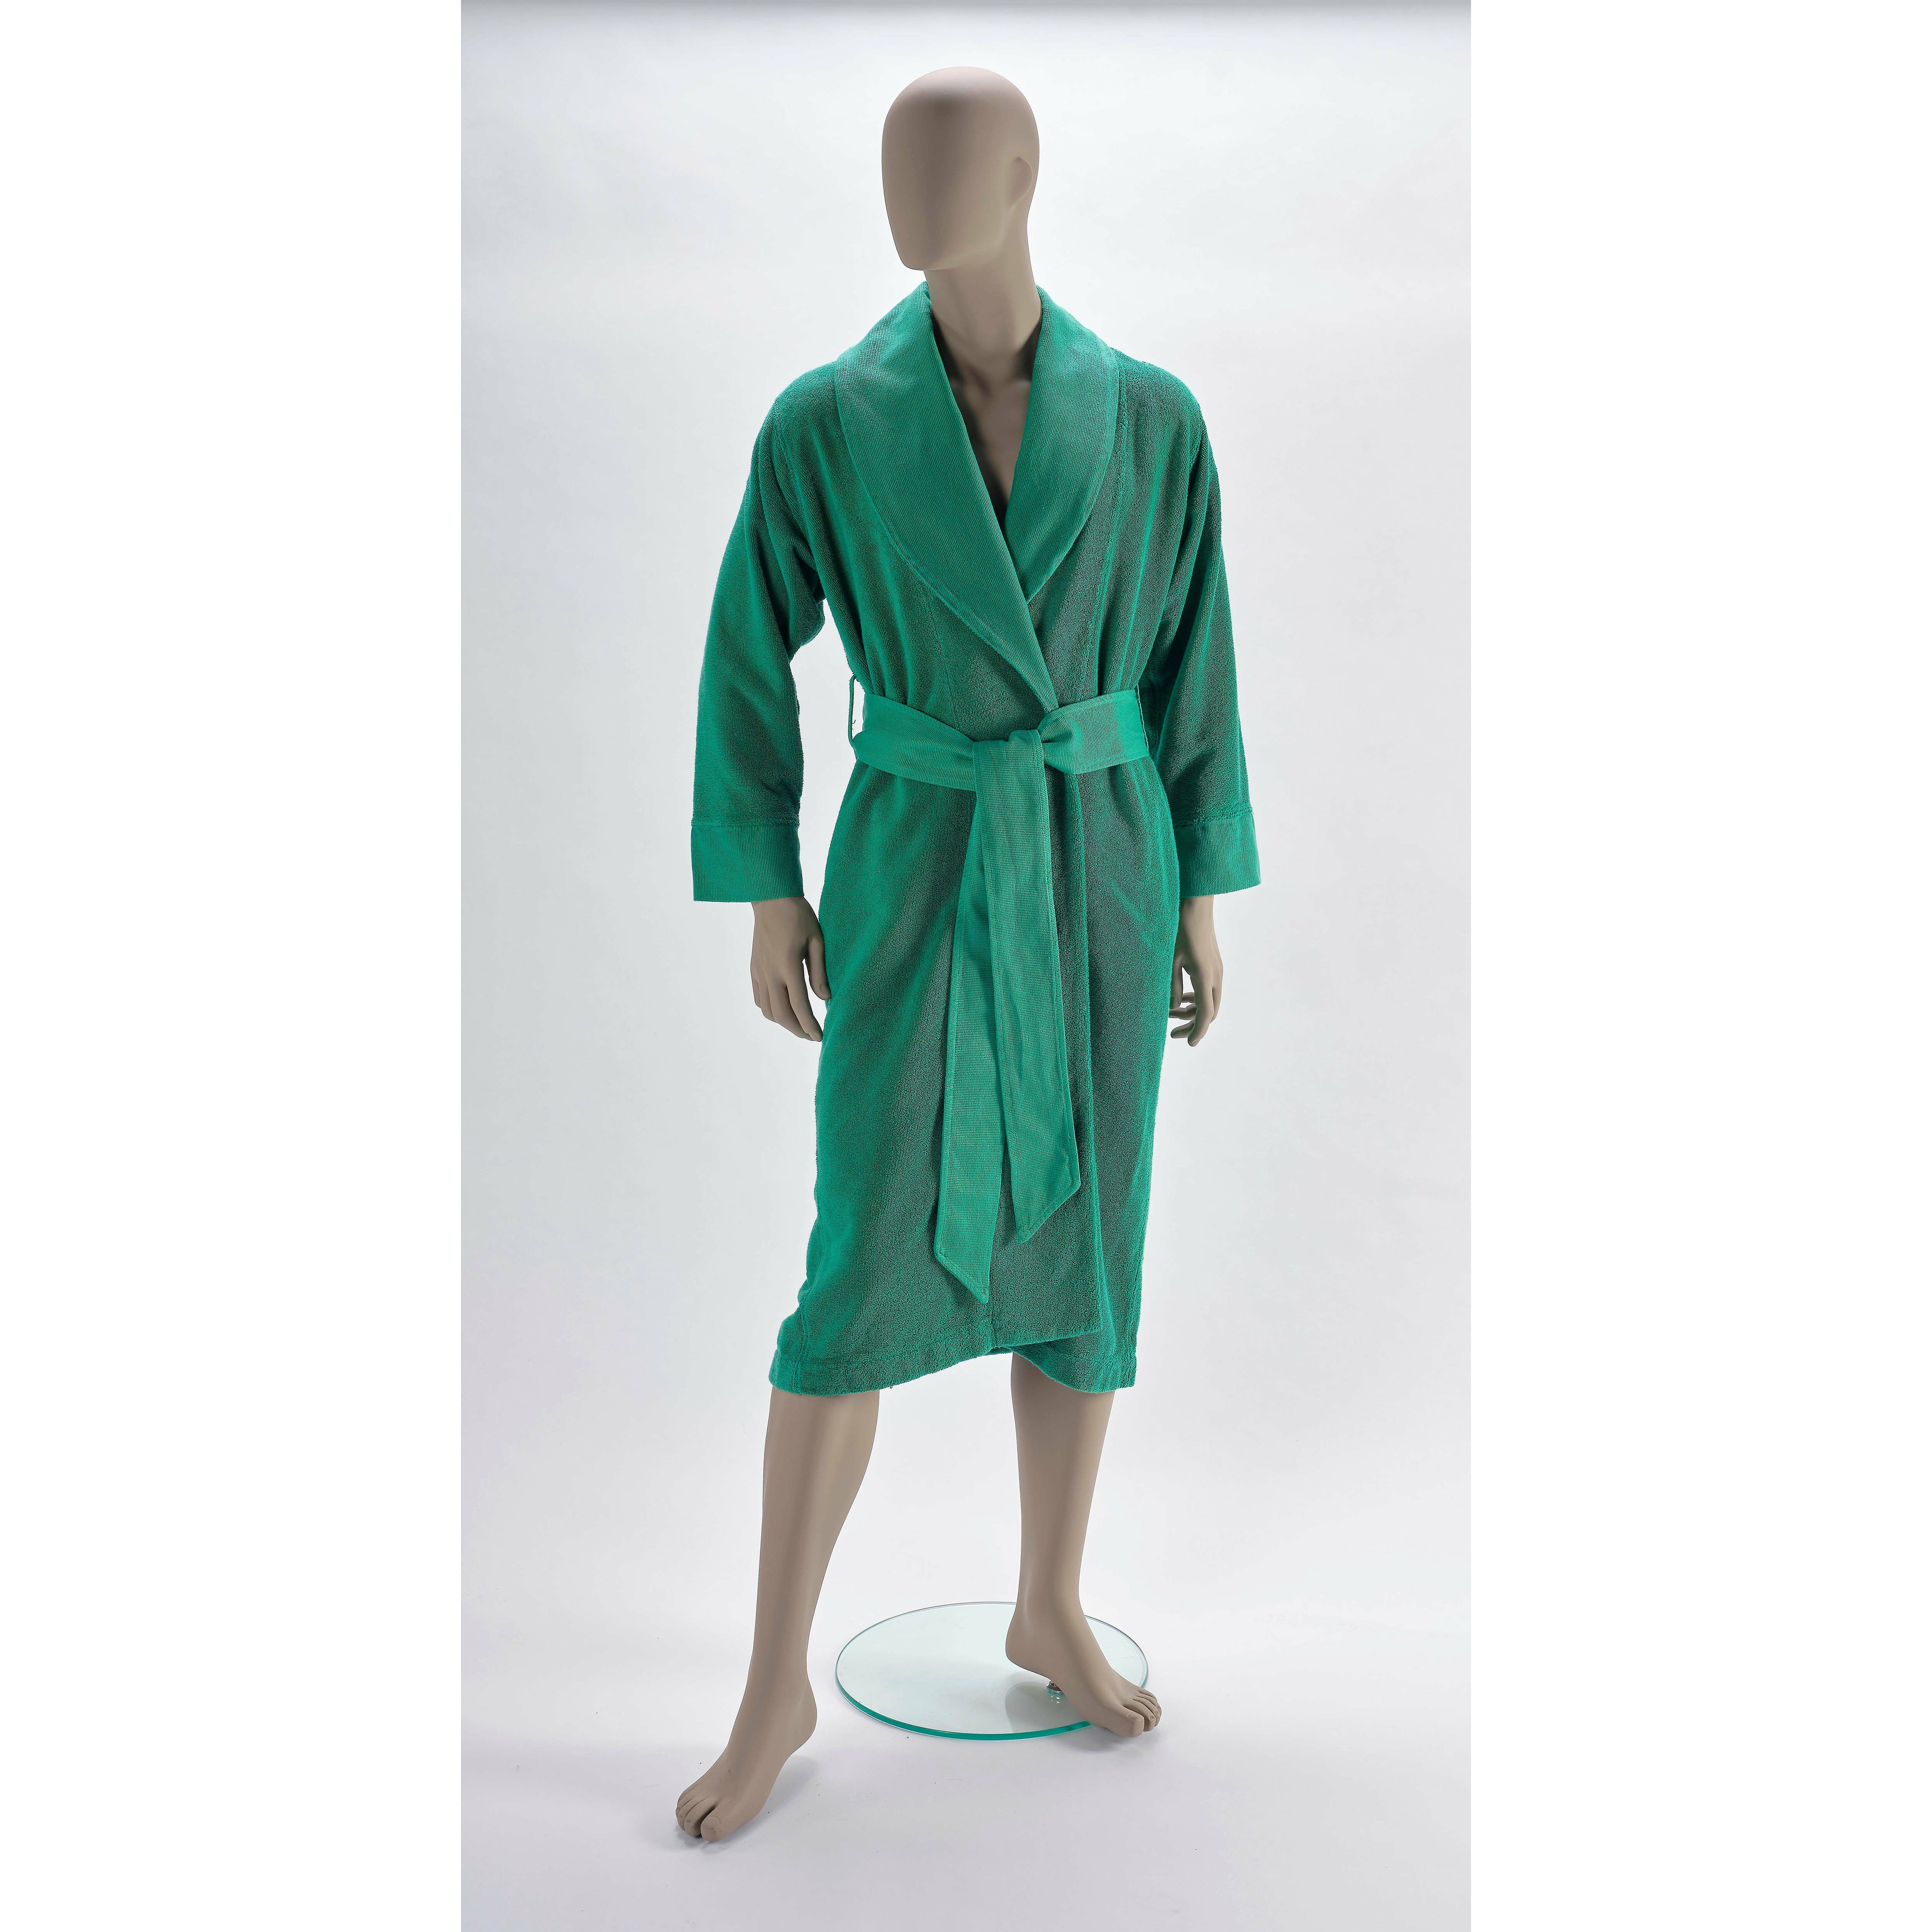 Marc Leopold Onlineshop for Bathrobes & Dressing Gowns from Switzerland,  Italy and Portugal | MARC LEOPOLD